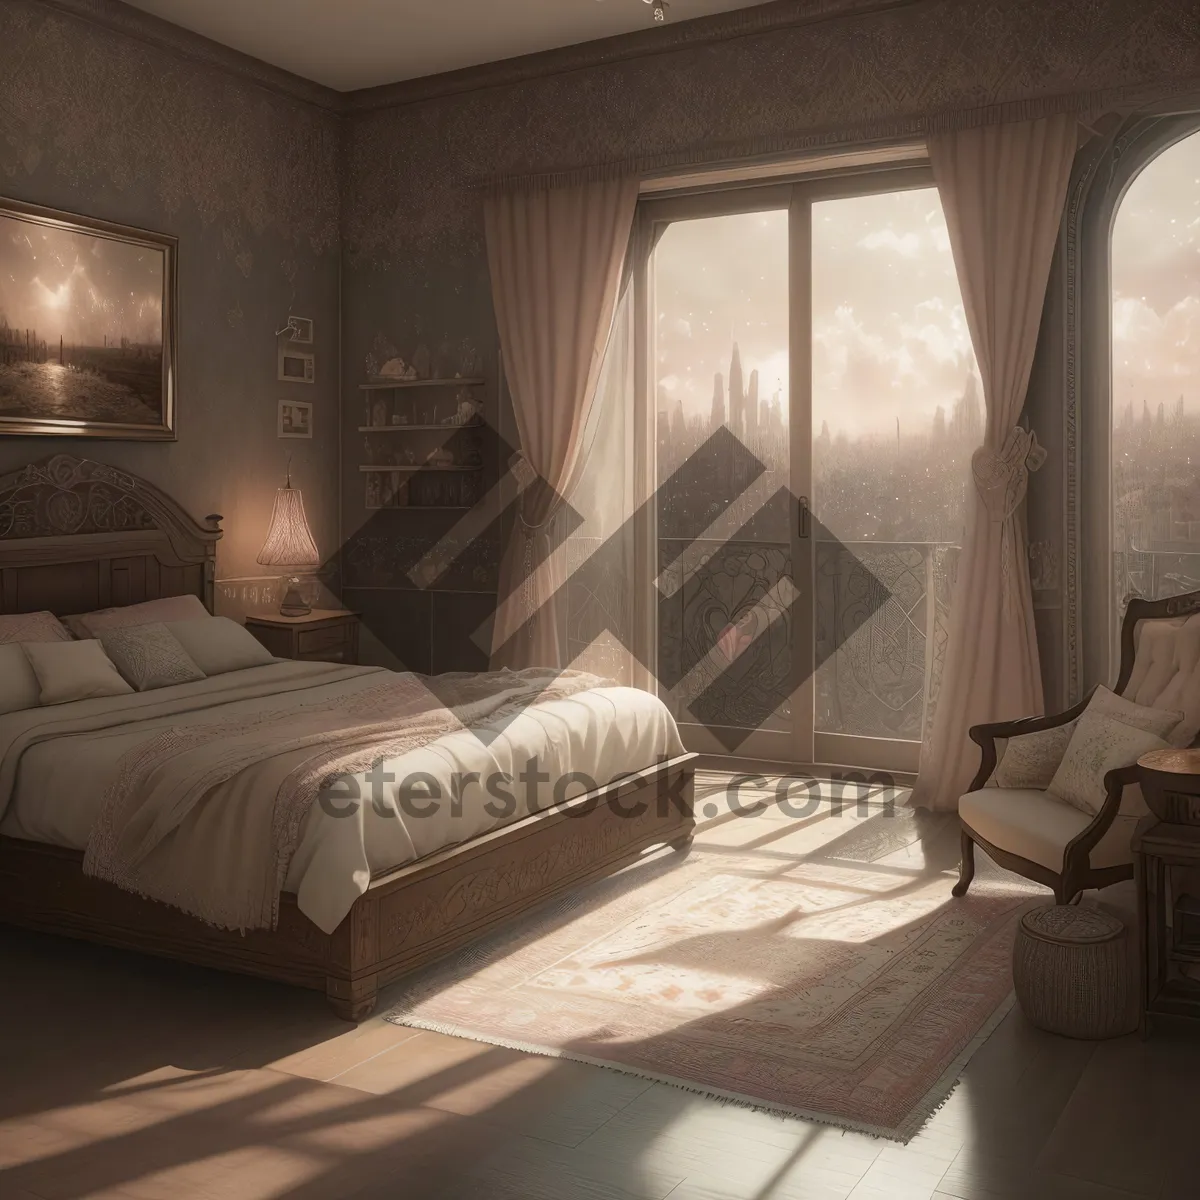 Picture of Modern, Cozy Bedroom with Stylish Furniture and Soft Lighting